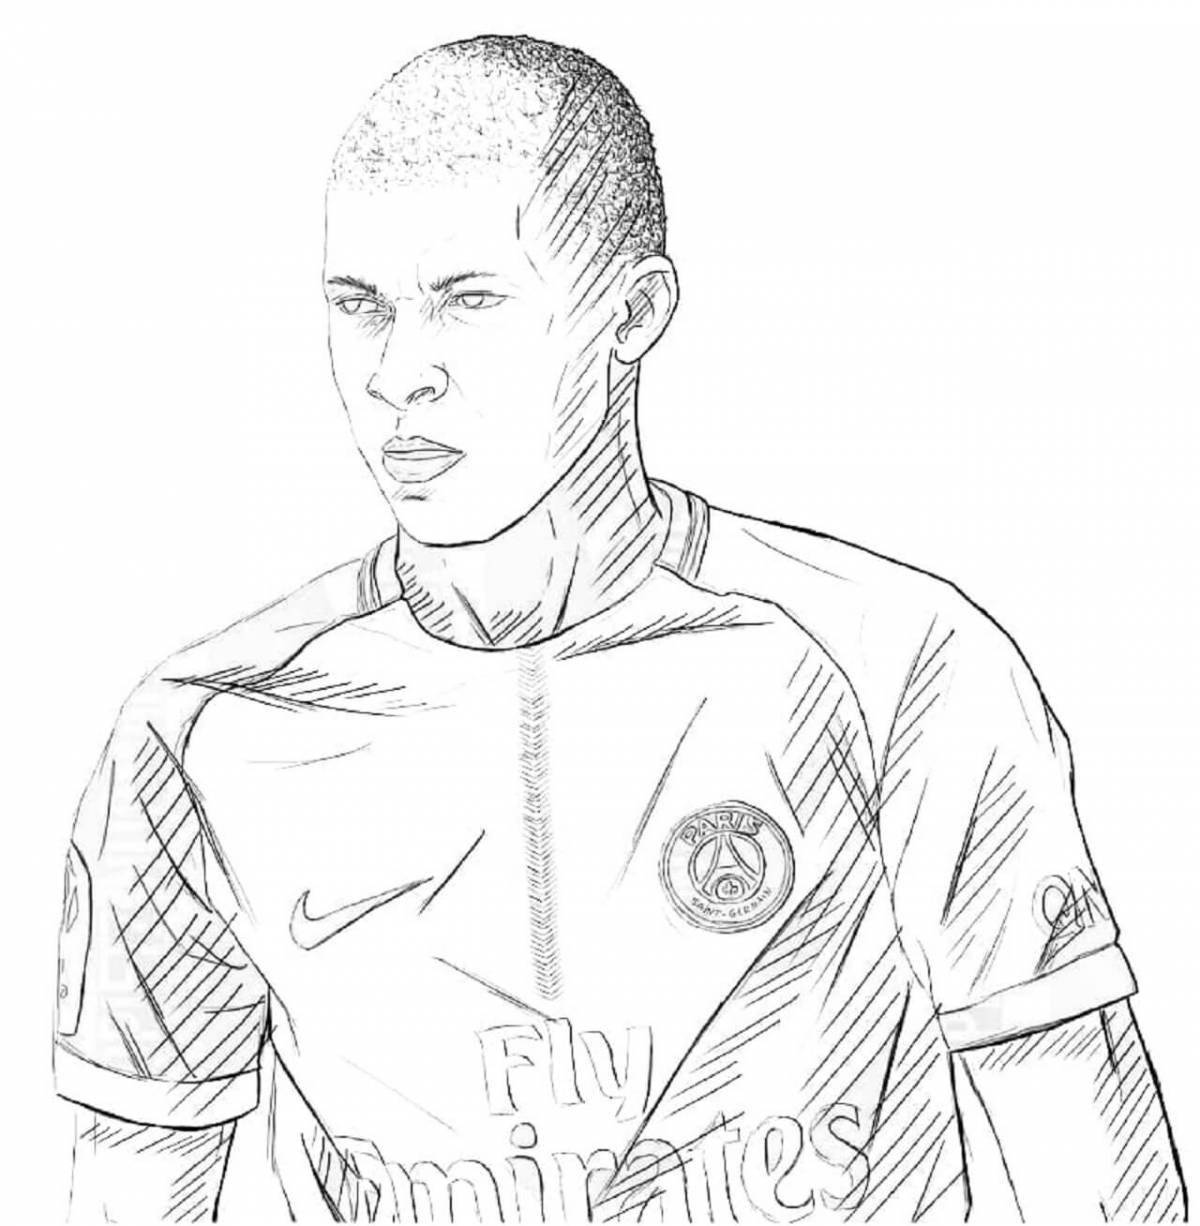 Coloring page stylish football player